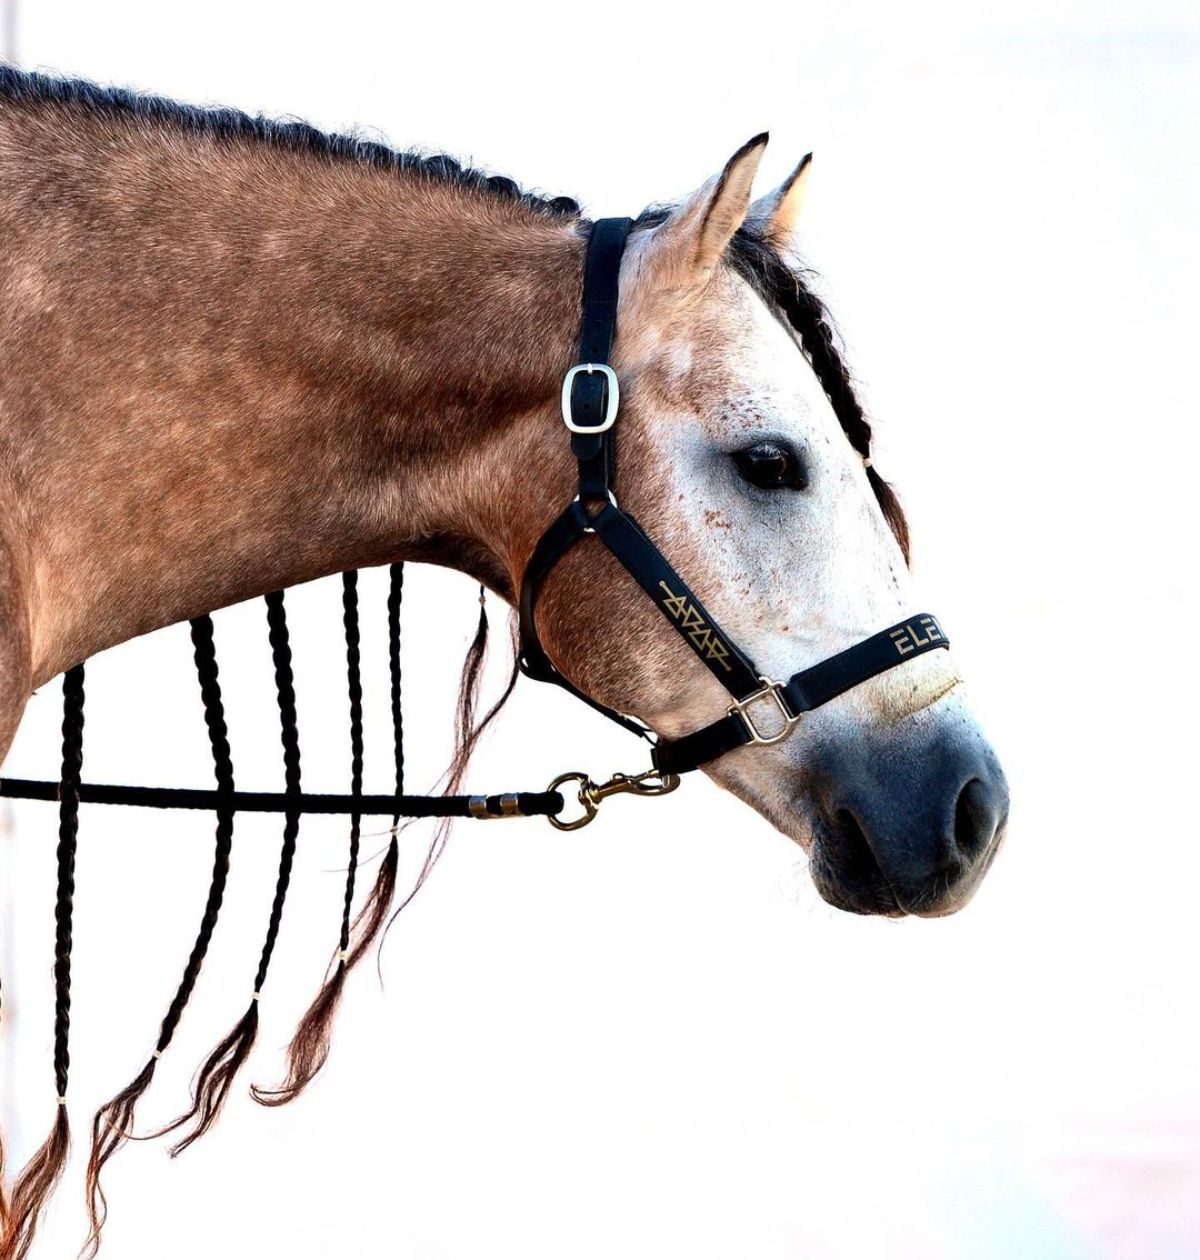 A close-up of a brown horse with gray patches on its head.